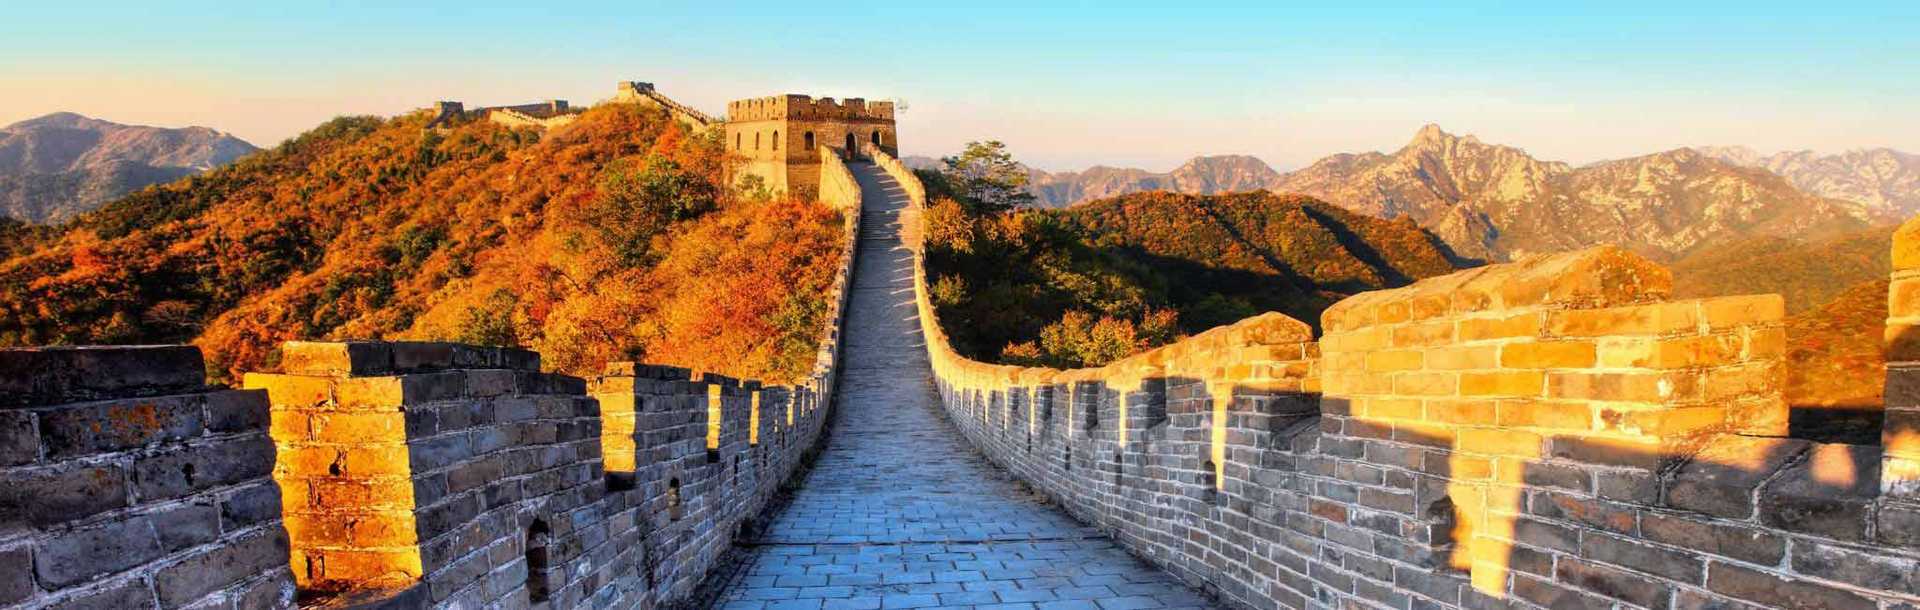 China Tour of The Great Wall in Autumn